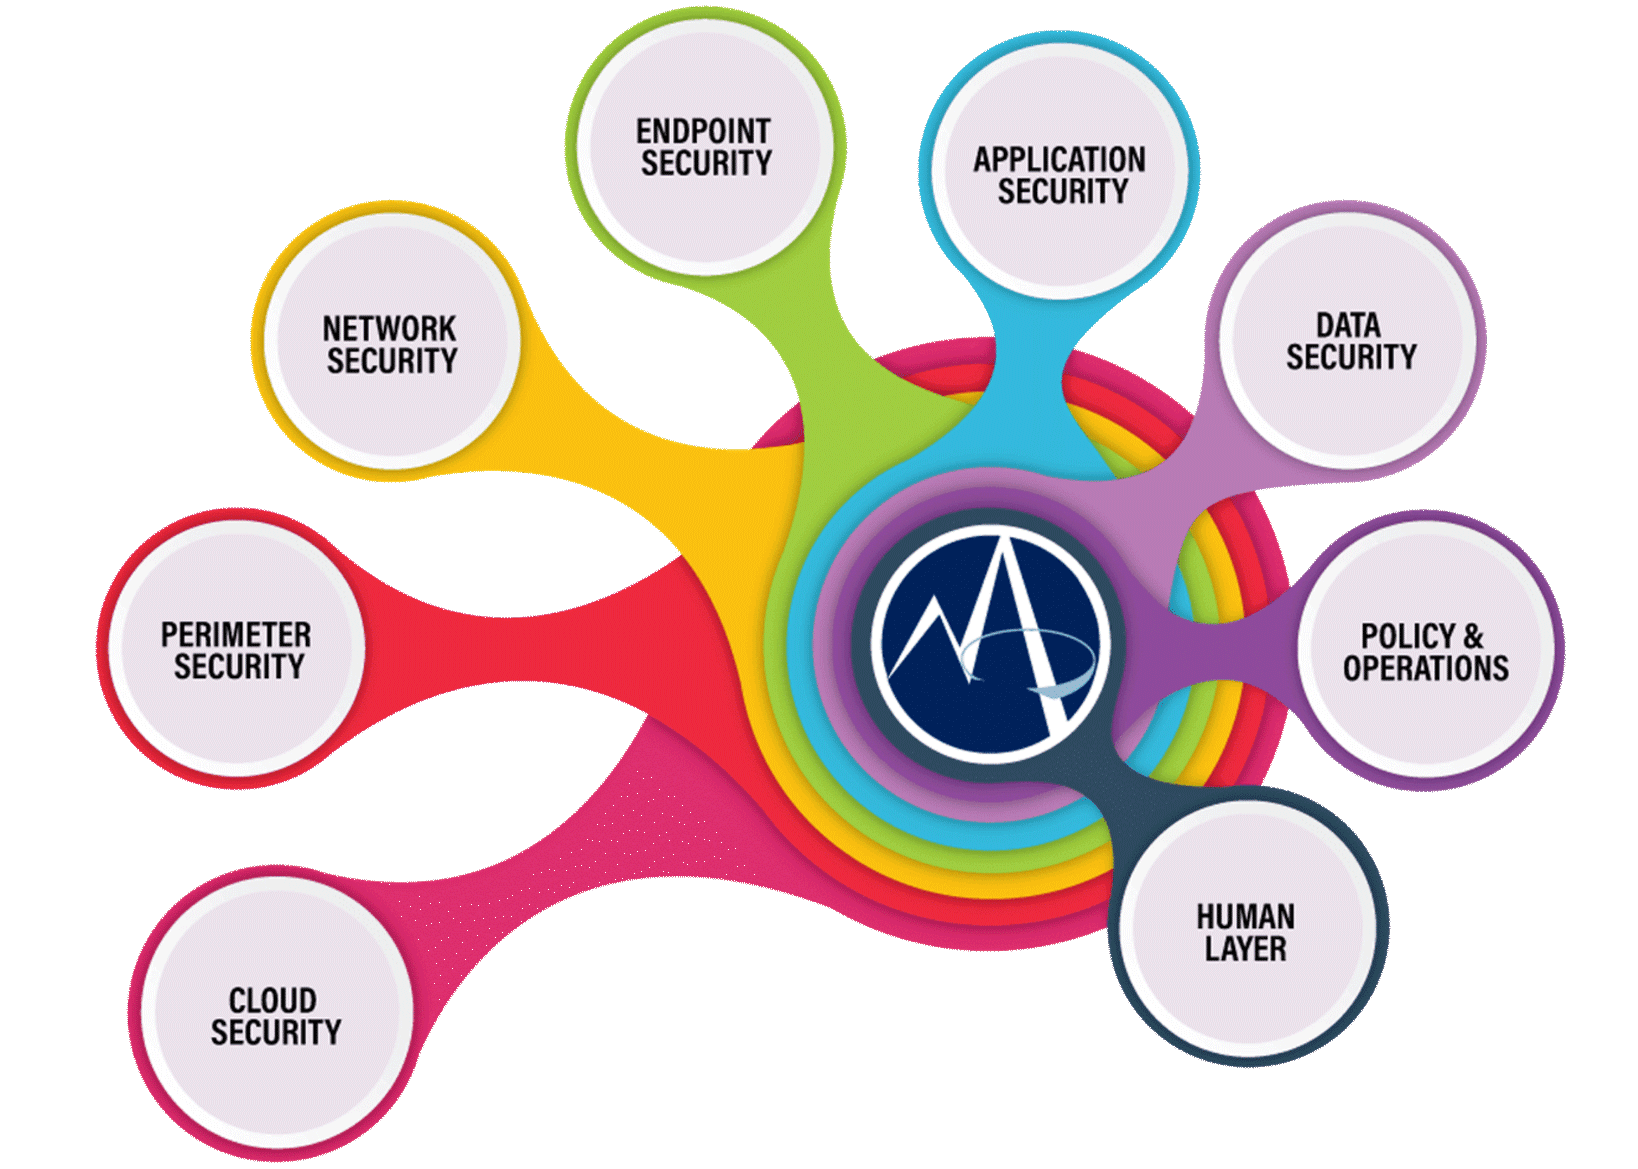 Multicolored graphic that shows eight levels of M.A. Polce's cybersecurity services in New York State including cloud security, perimeter, network security, endpoint security. application security, data security, policy and operations, and the human layer.